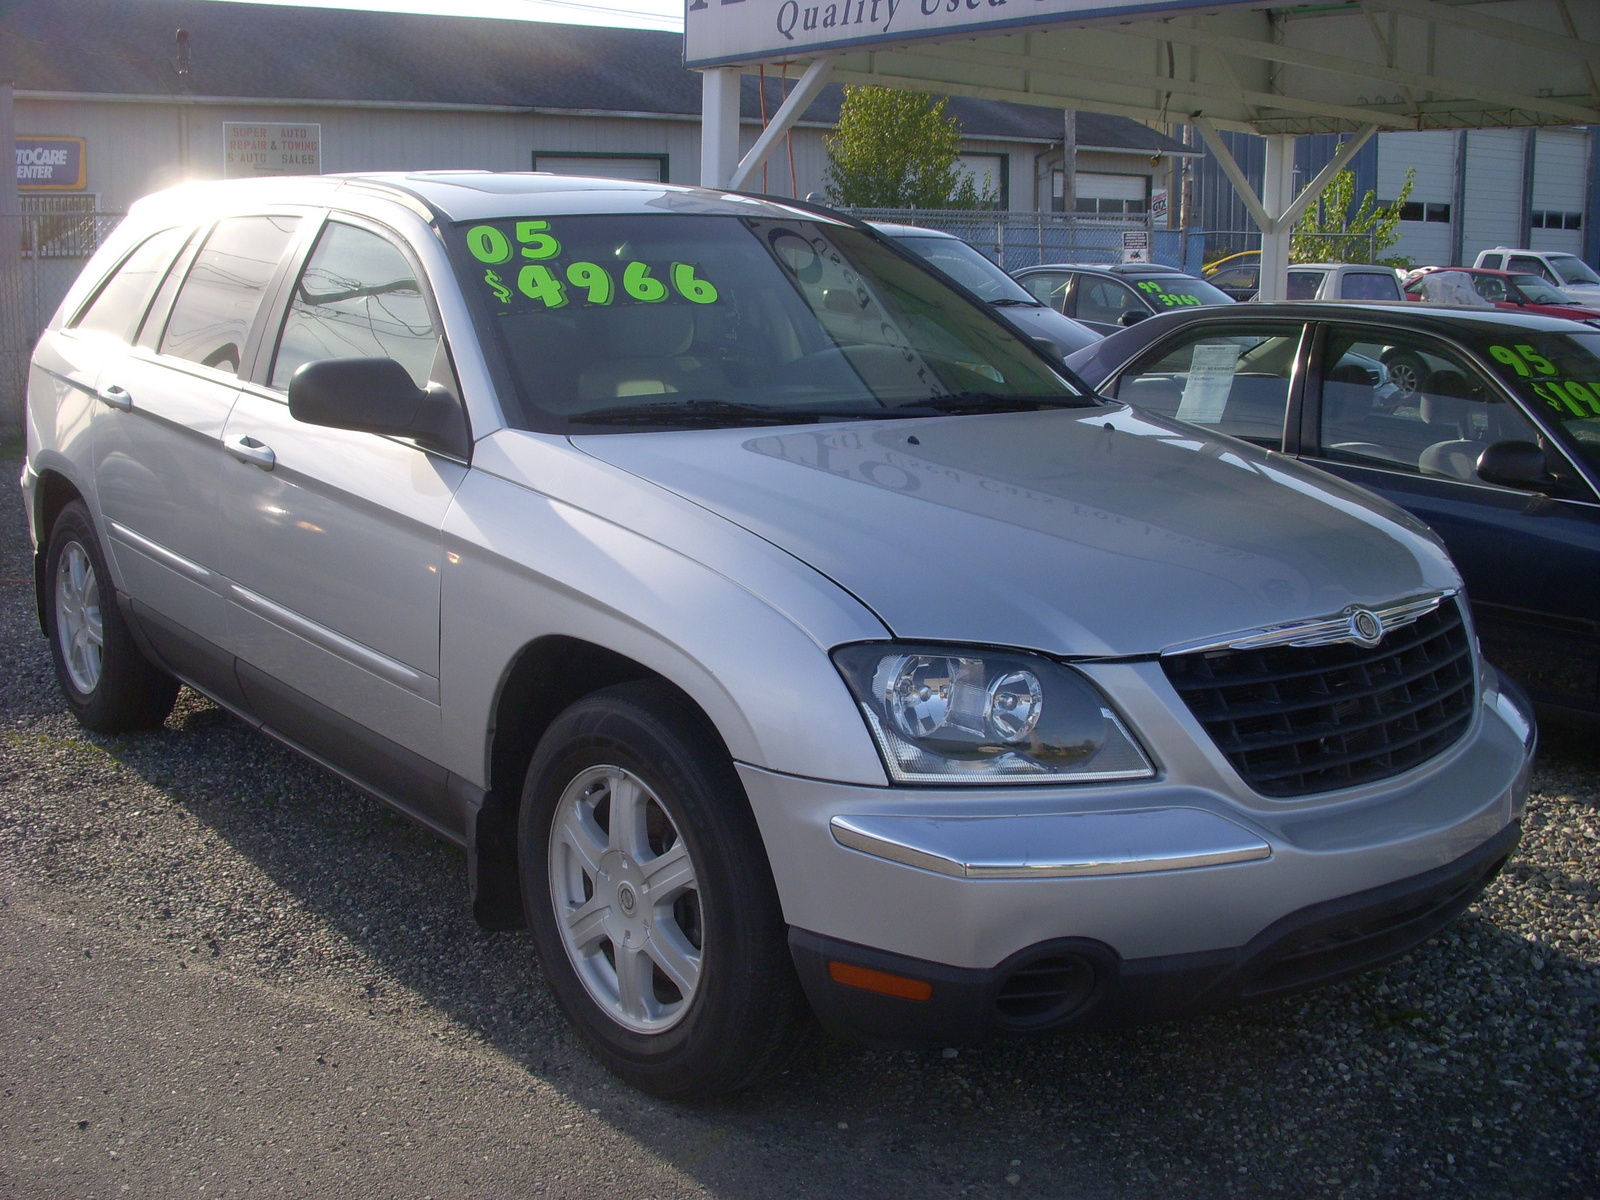 Price for 2005 chrysler pacifica #3